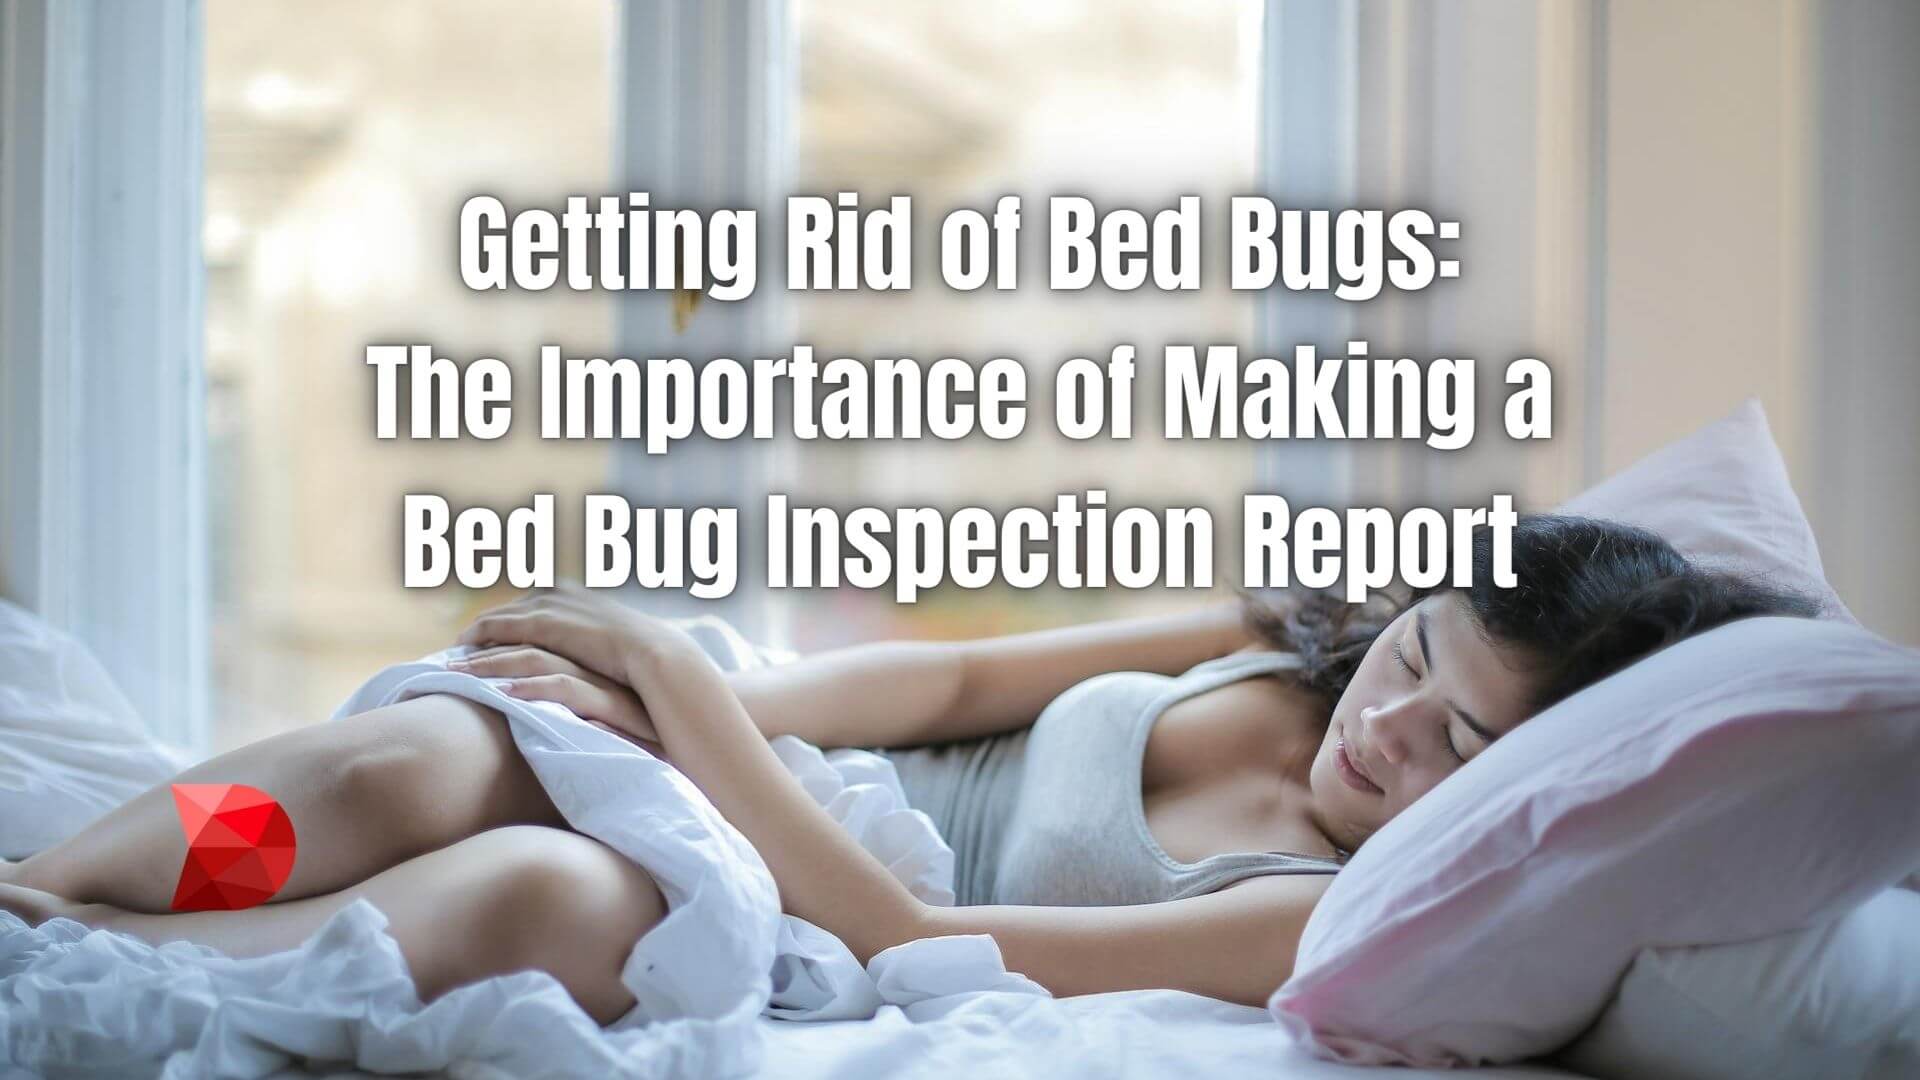 Conquer bed bugs once and for all! Click here to learn why crafting a bed bug inspection report is essential for effective pest management.